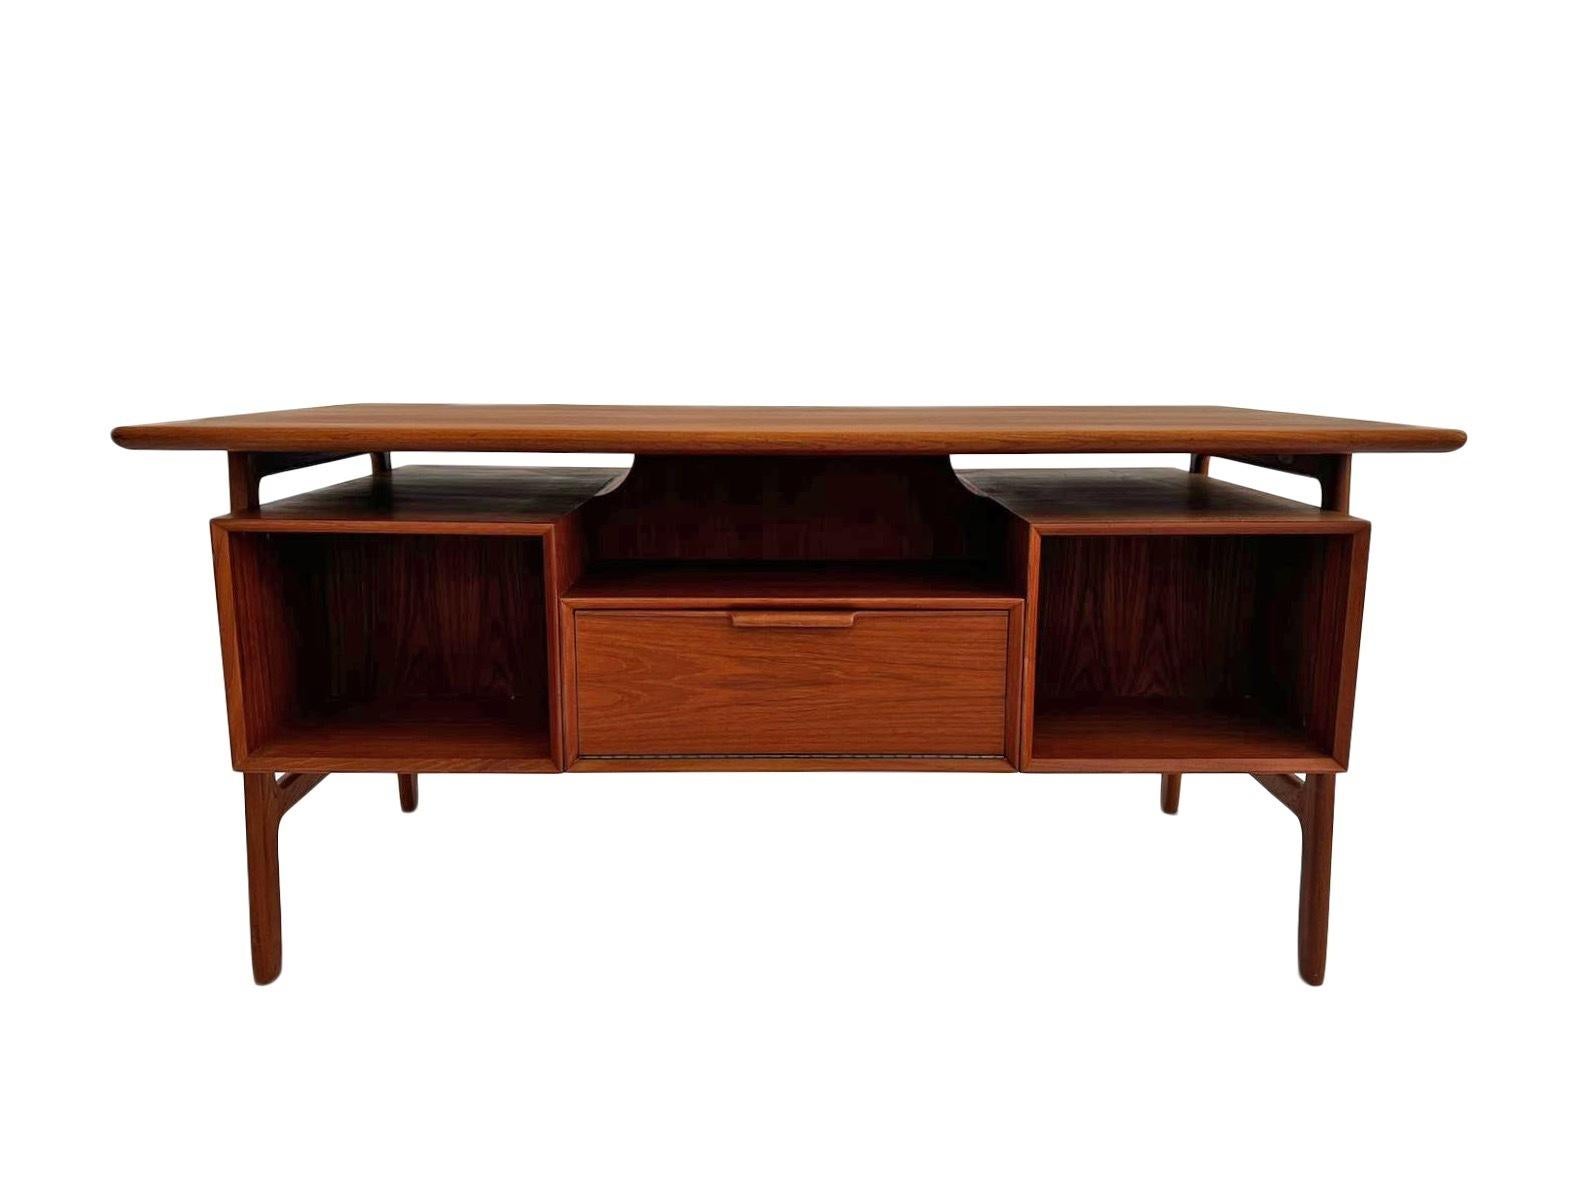 A beautiful Danish Model 75 teak writing desk designed by Gunni Omann for Omann Jun Møblefabrik, this would make a stylish addition to any work area. A striking piece of classically designed Scandinavian furniture.

The desk has two banks of three